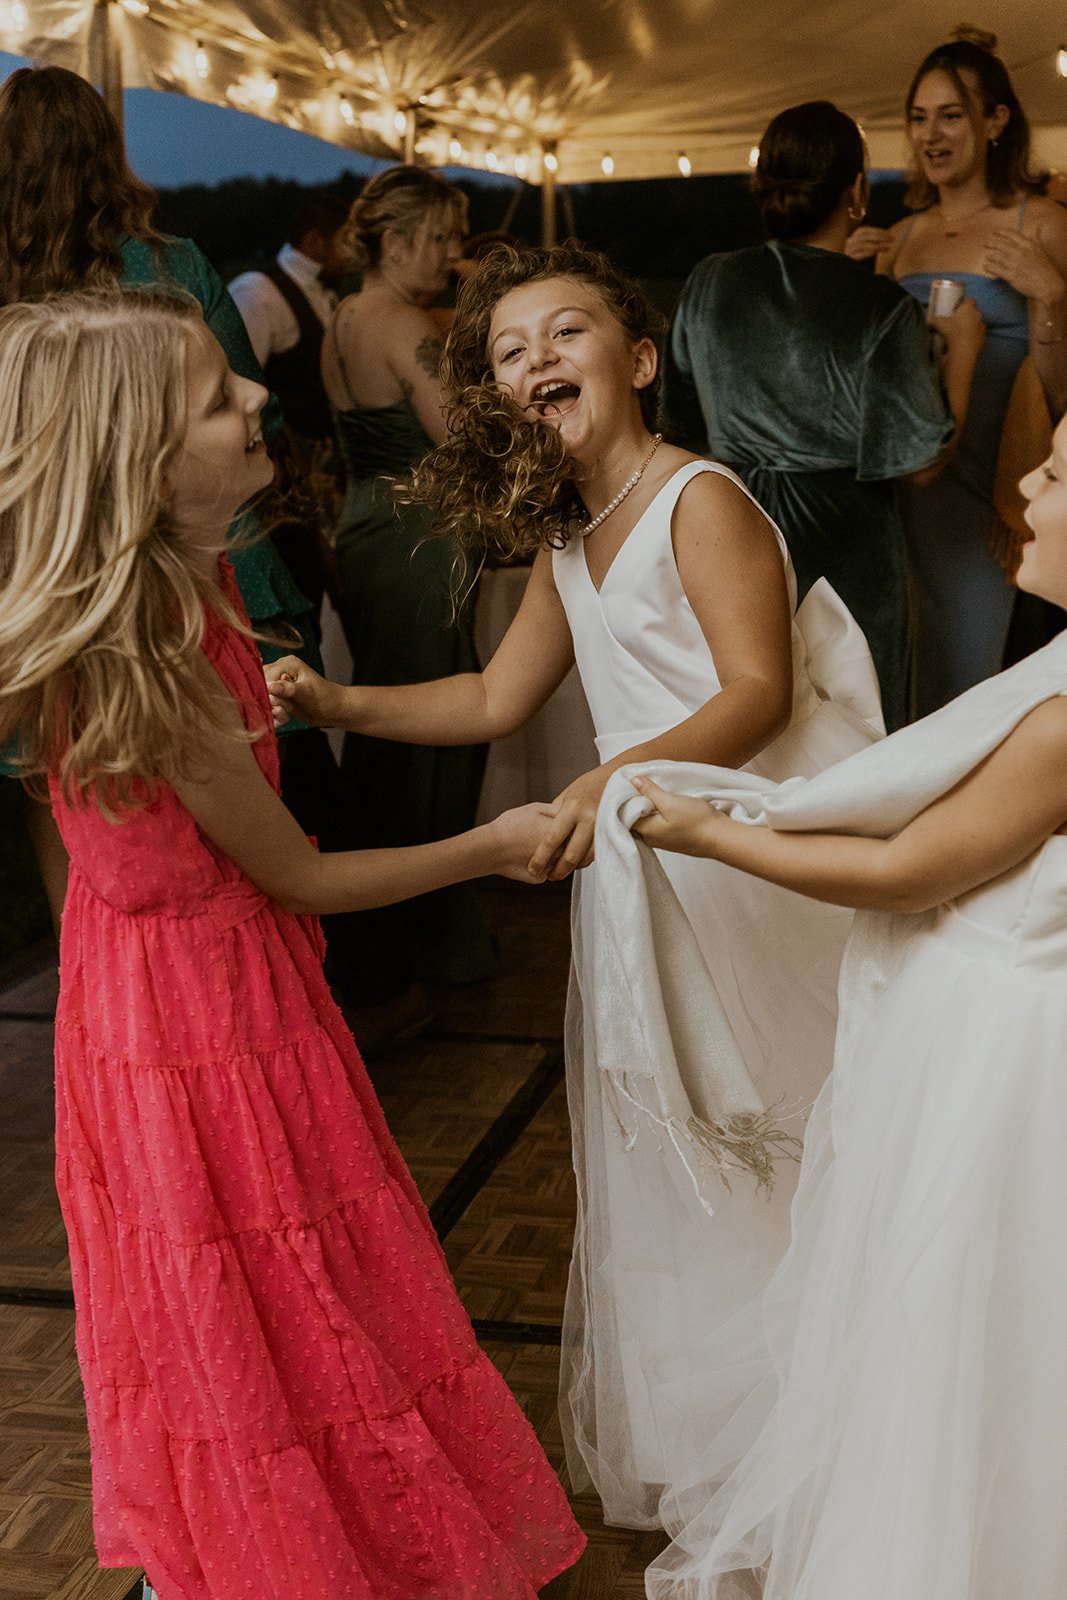 The flower girls dance happily with other children at the wedding. 